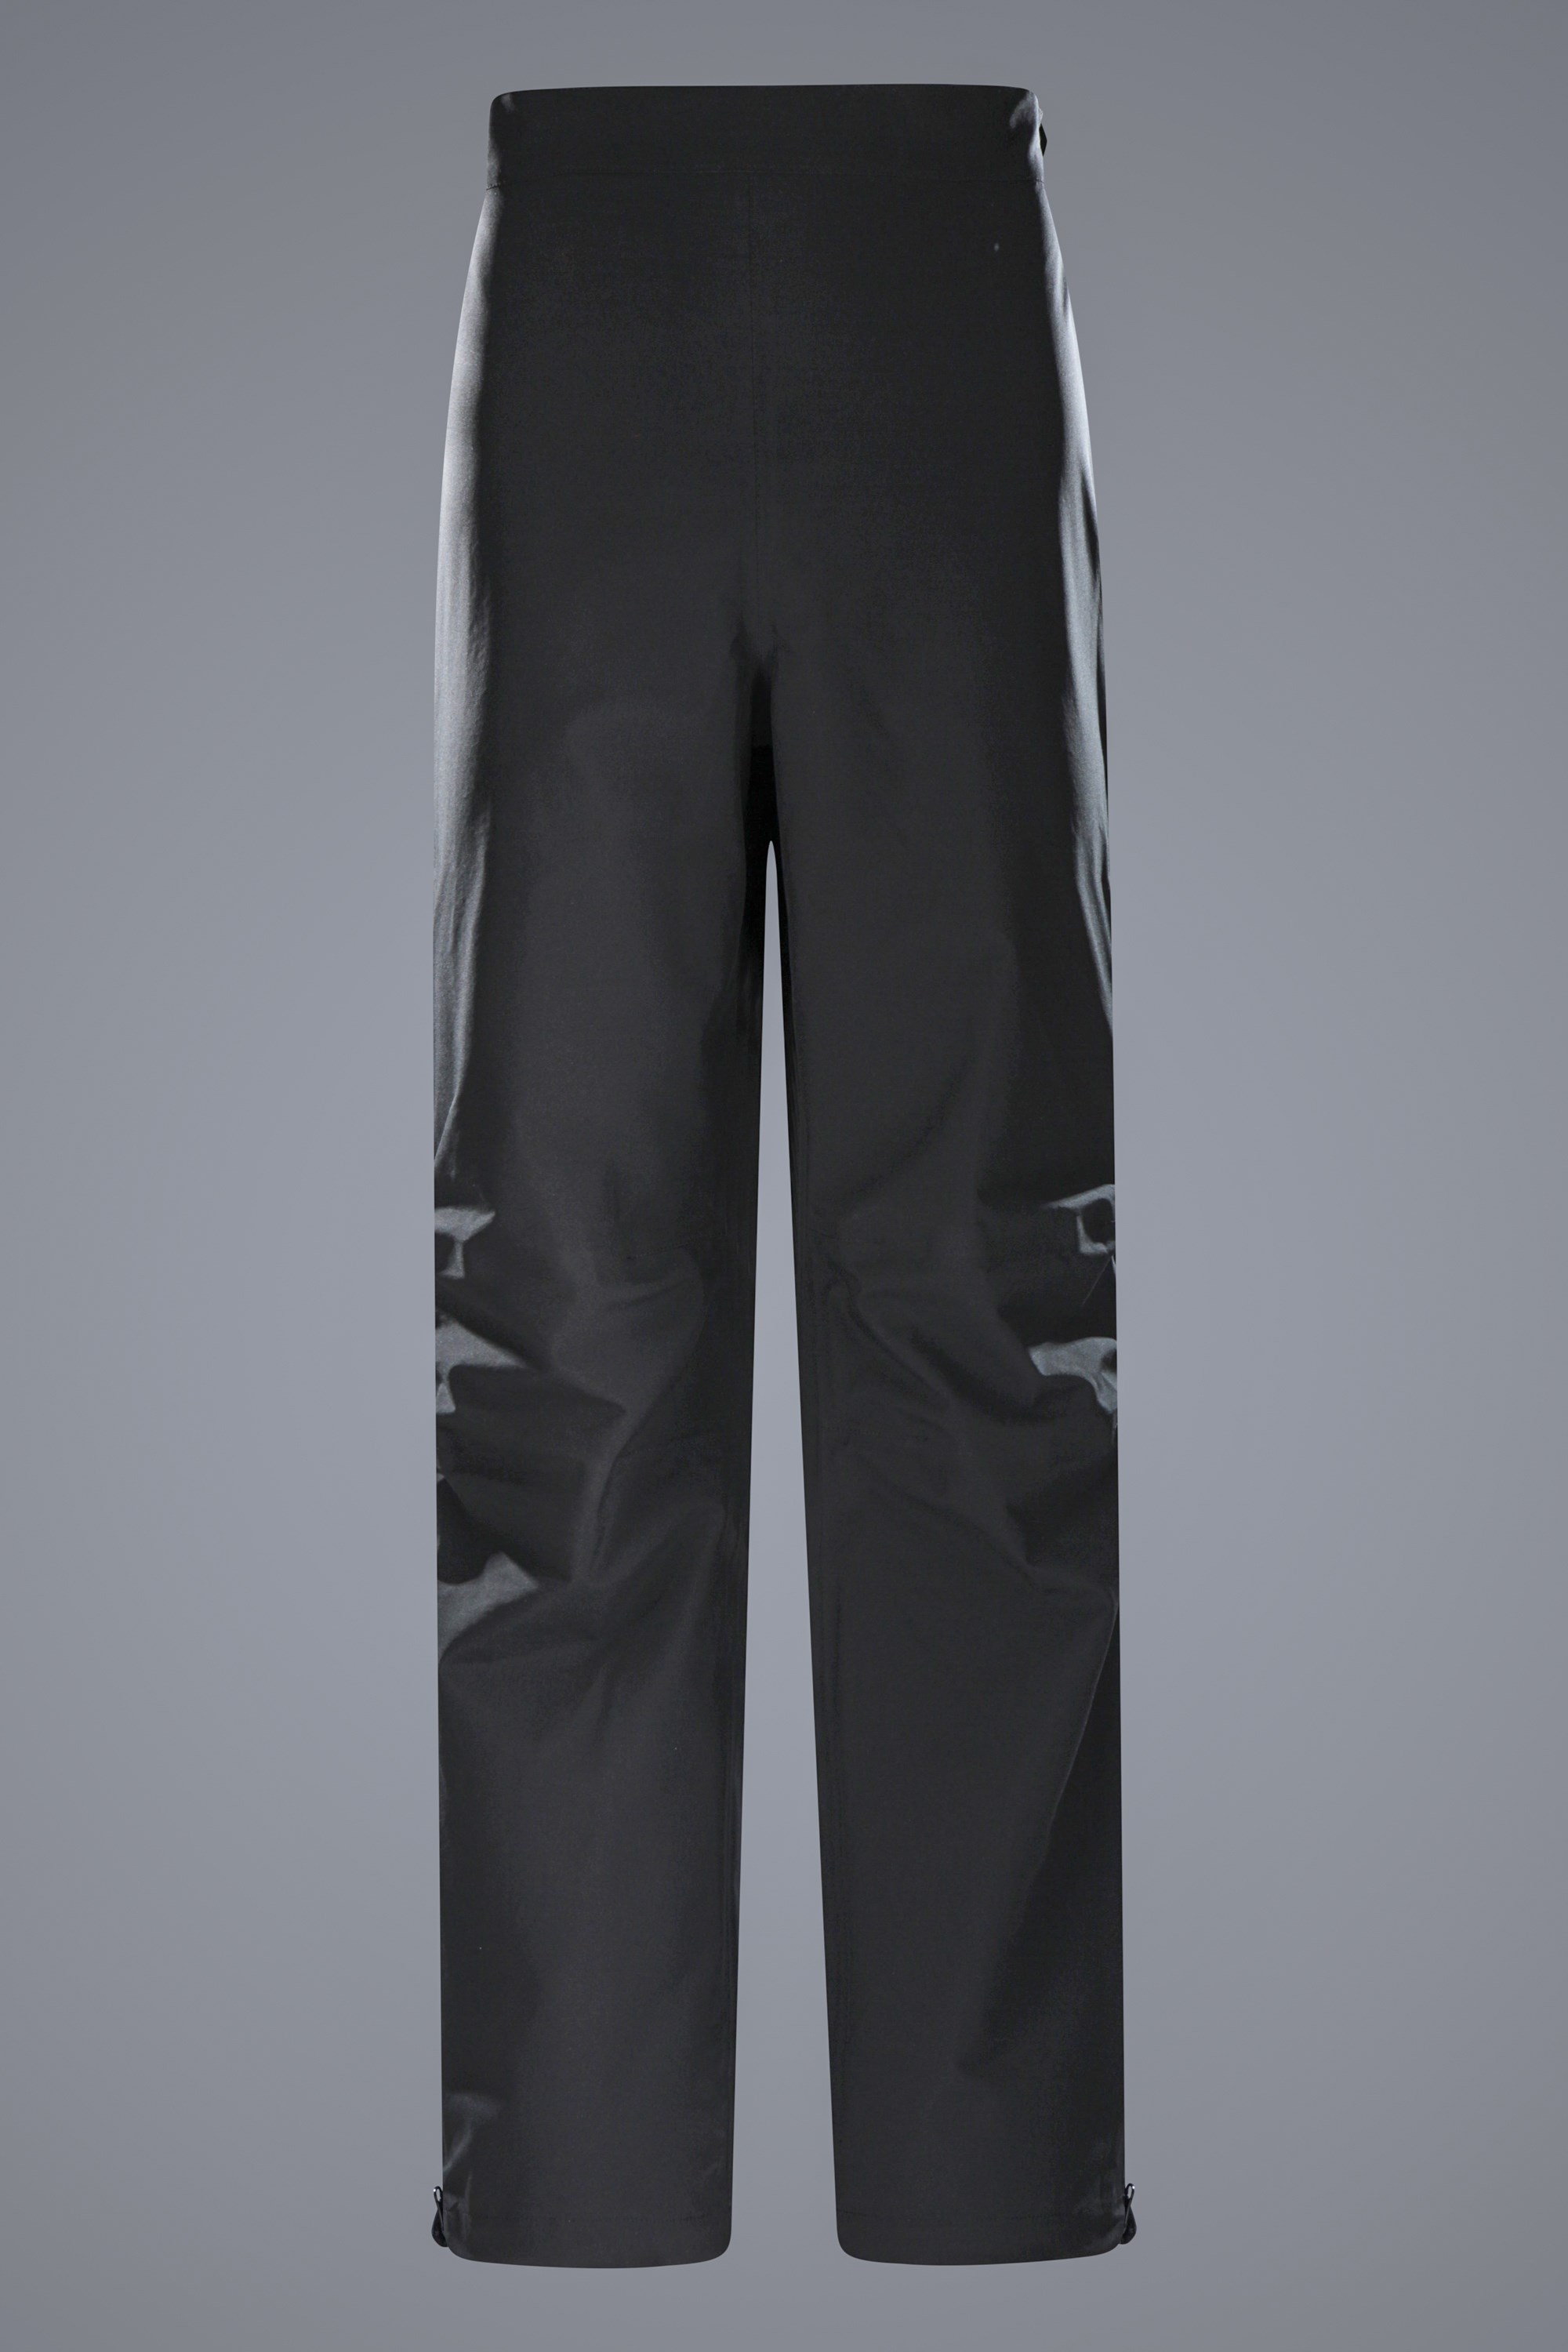 Update more than 86 waterproof trousers buying guide - in.cdgdbentre